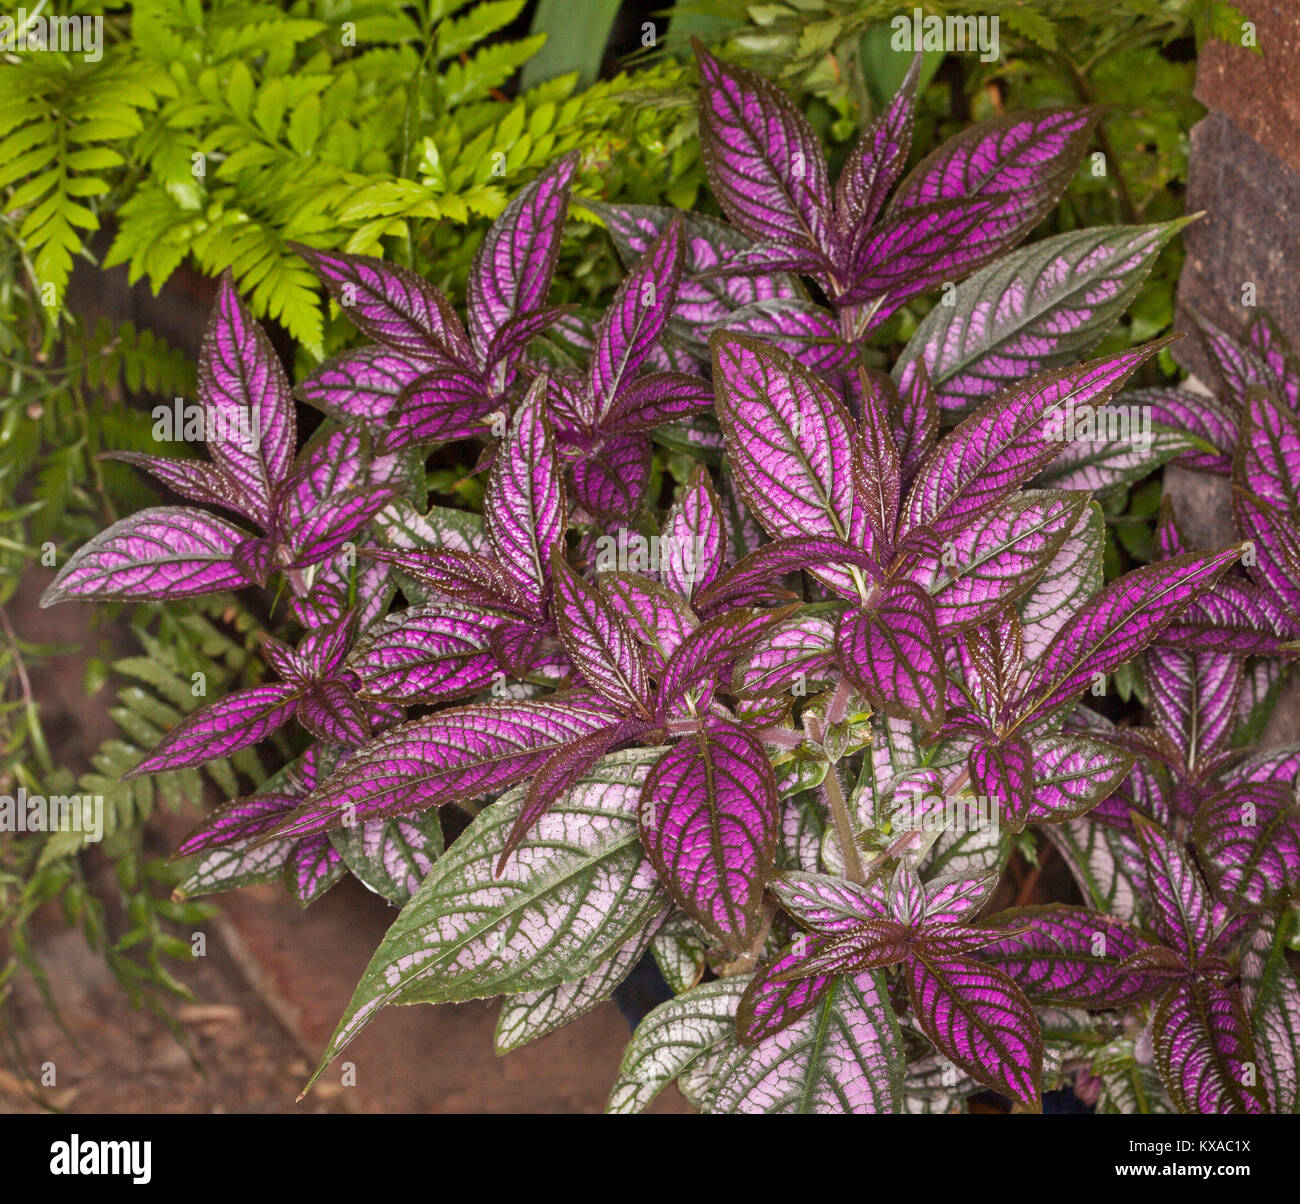 Cluster of vivid purple foliage of Strobilanthes dyerianus / dyeriana, Persian shield plant, growing in garden in Queensland, Australia Stock Photo